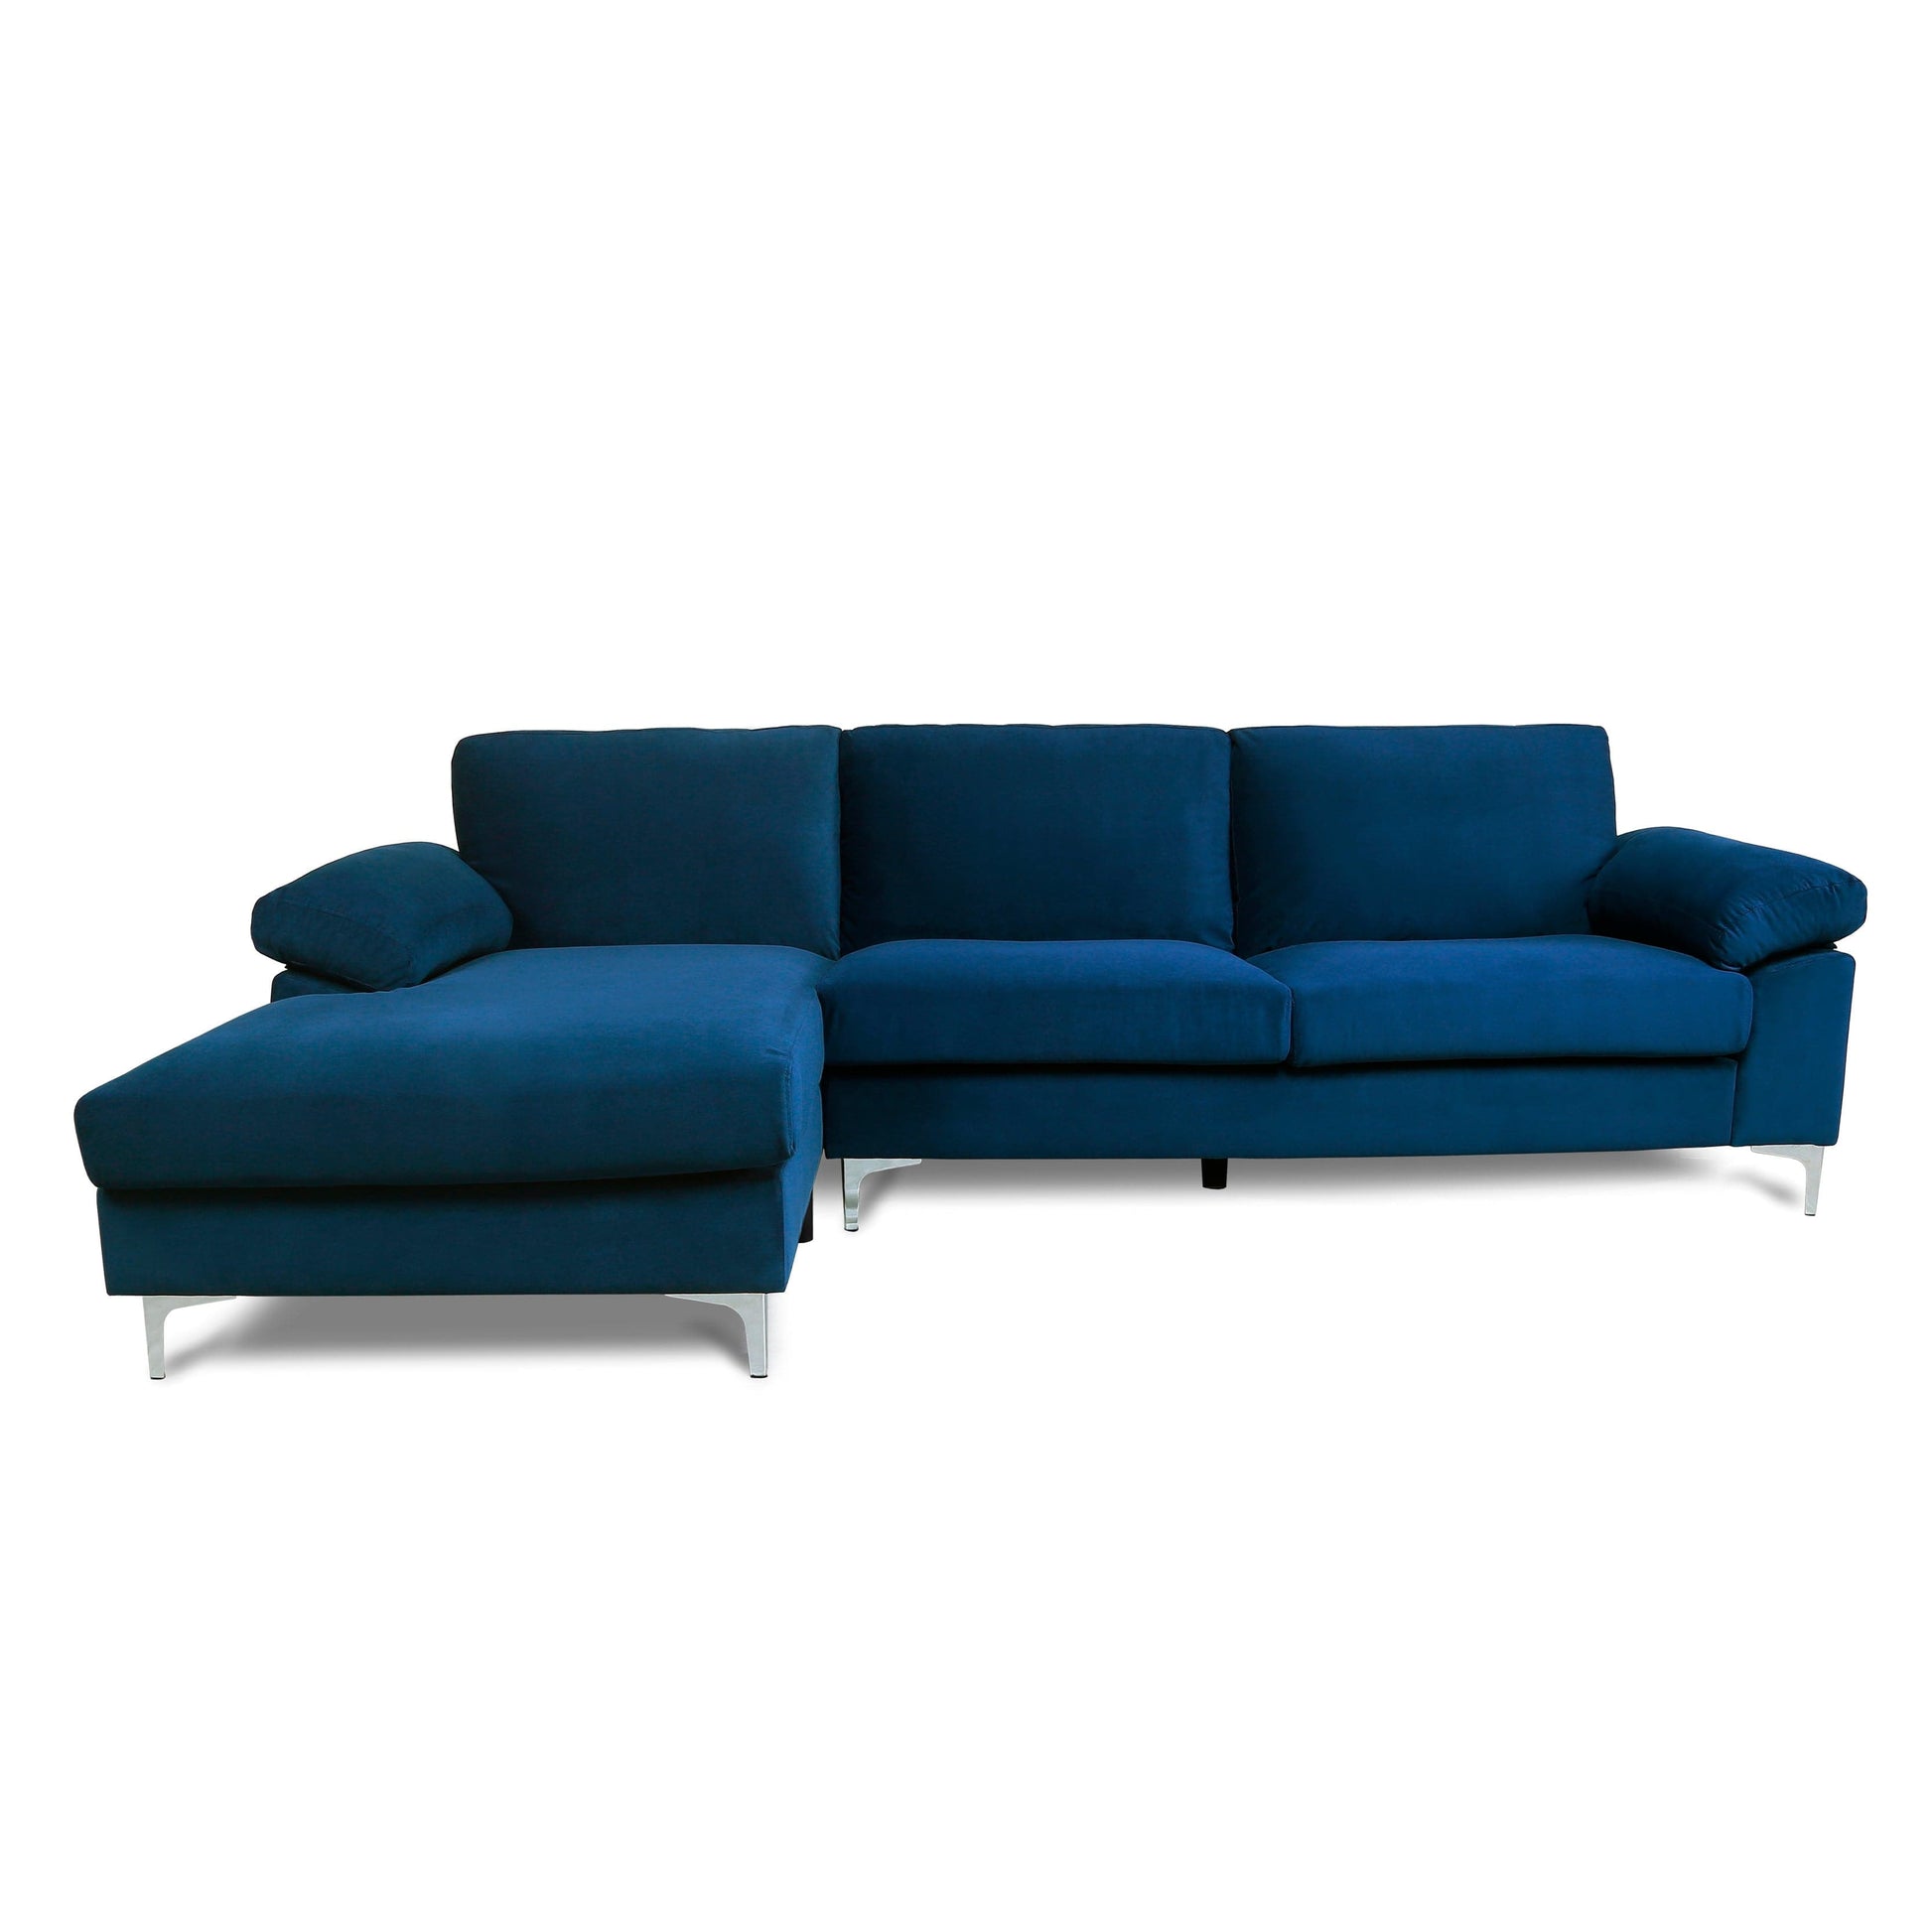 TFC&H Co. SECTIONAL SOFA VELVET LEFT HAND FACING - NAVY BLUE- Ships from The US - sectional at TFC&H Co.